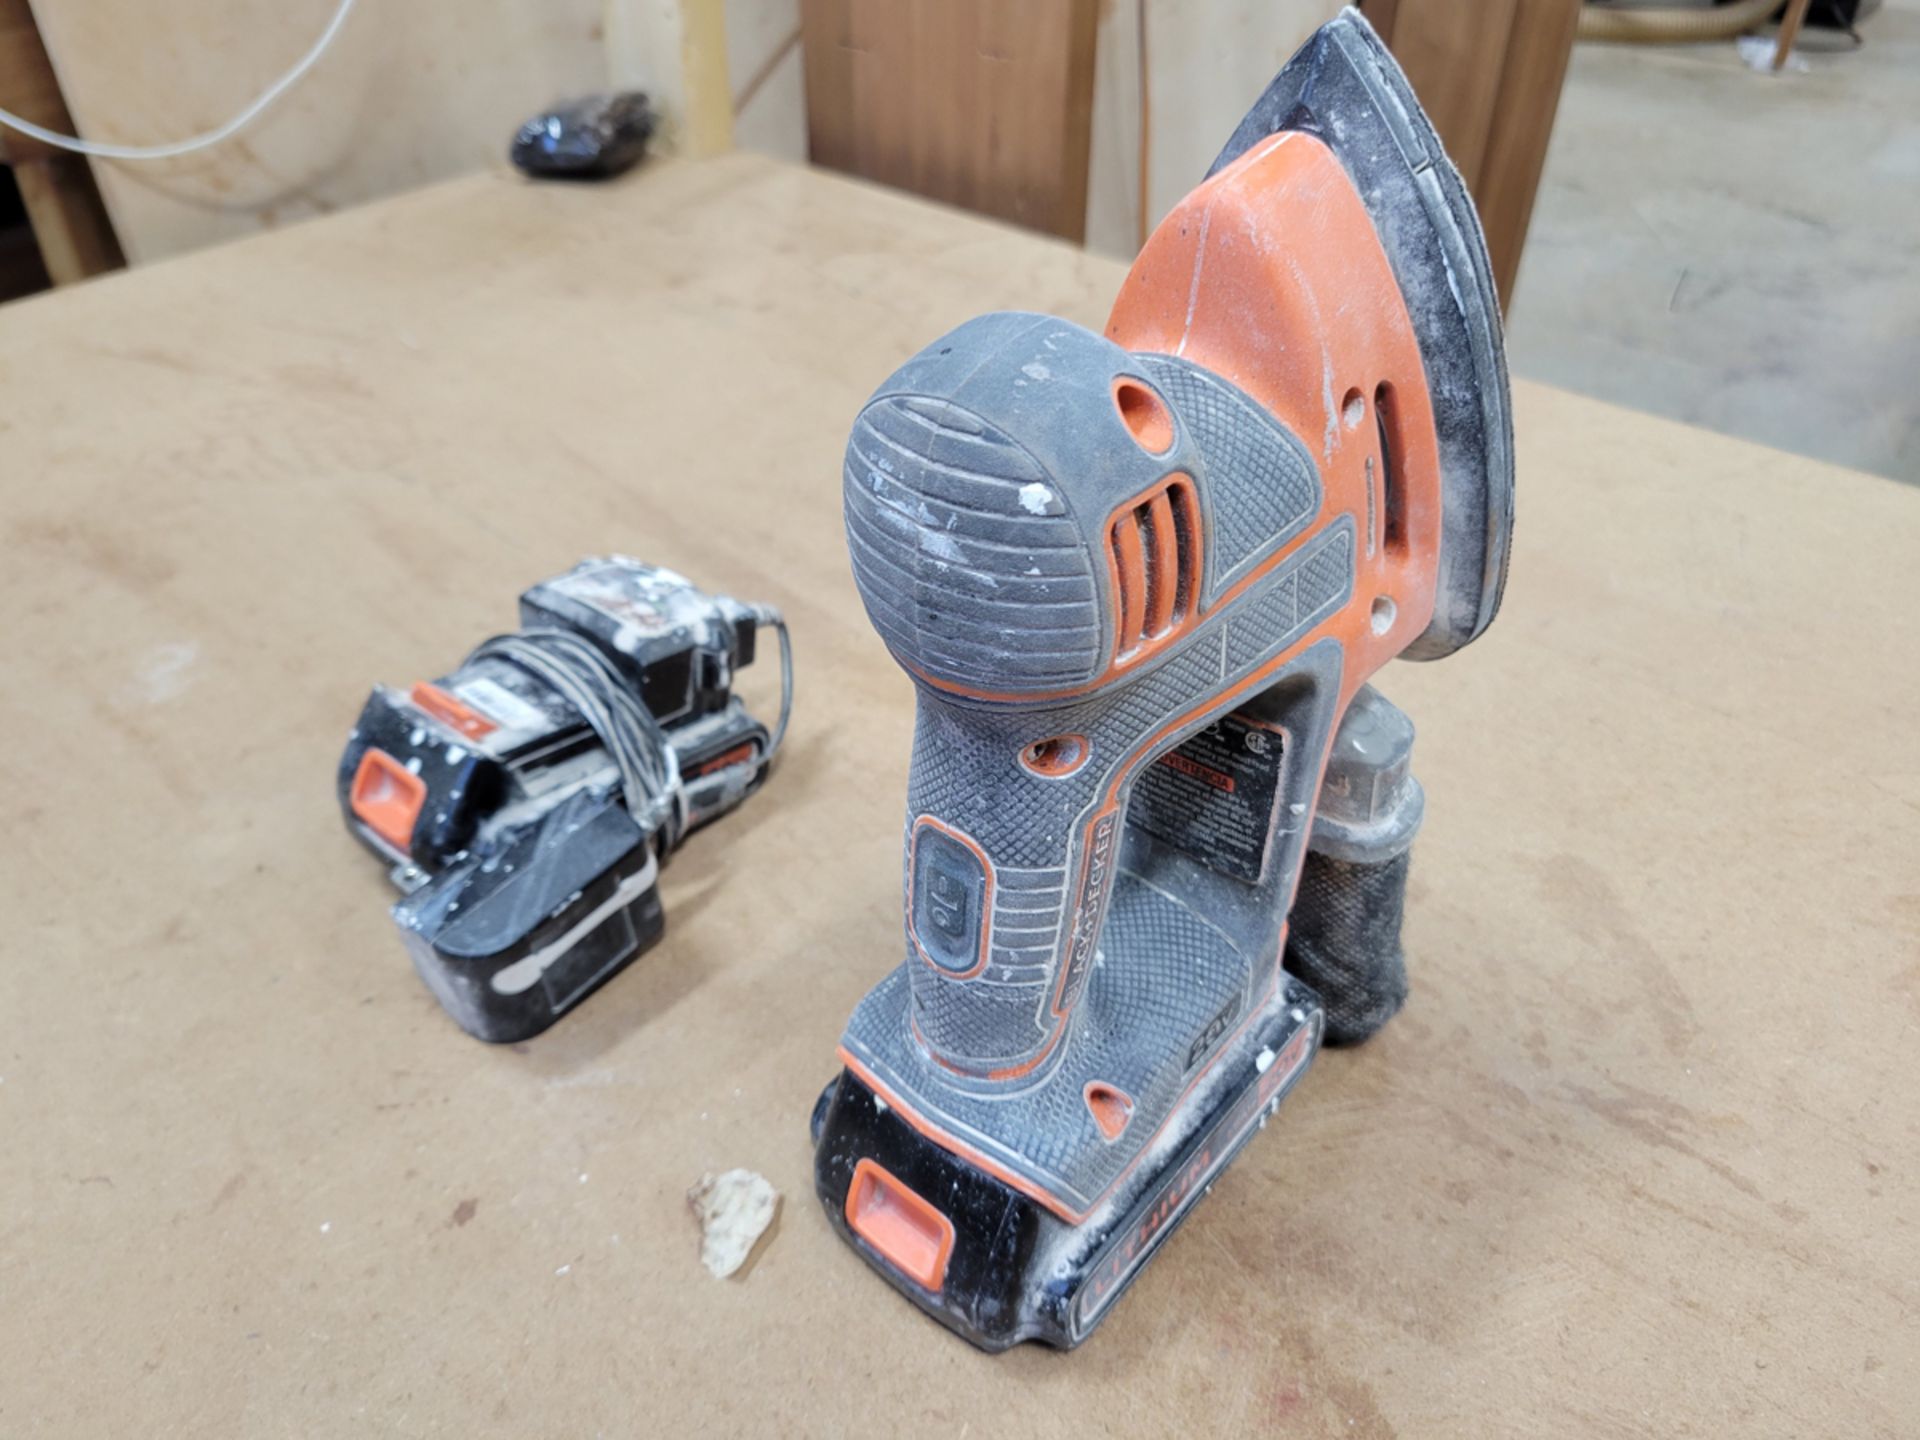 Black And Decker 20 Volt Model: BDCMS20 Mouse Sander w/ Battery and Charger